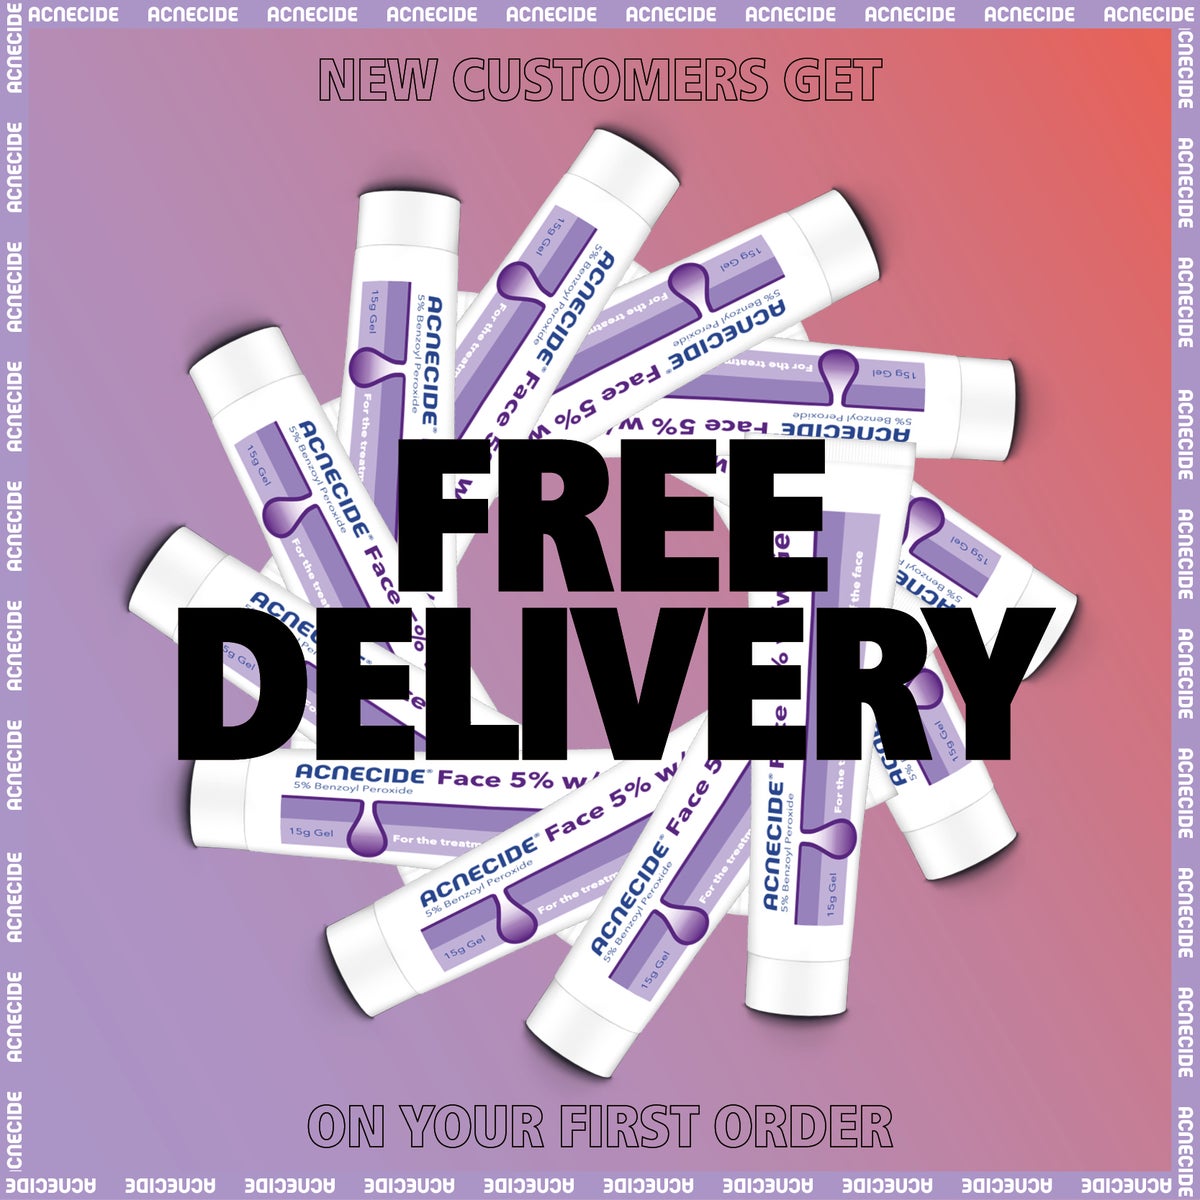 free delivery acnecide